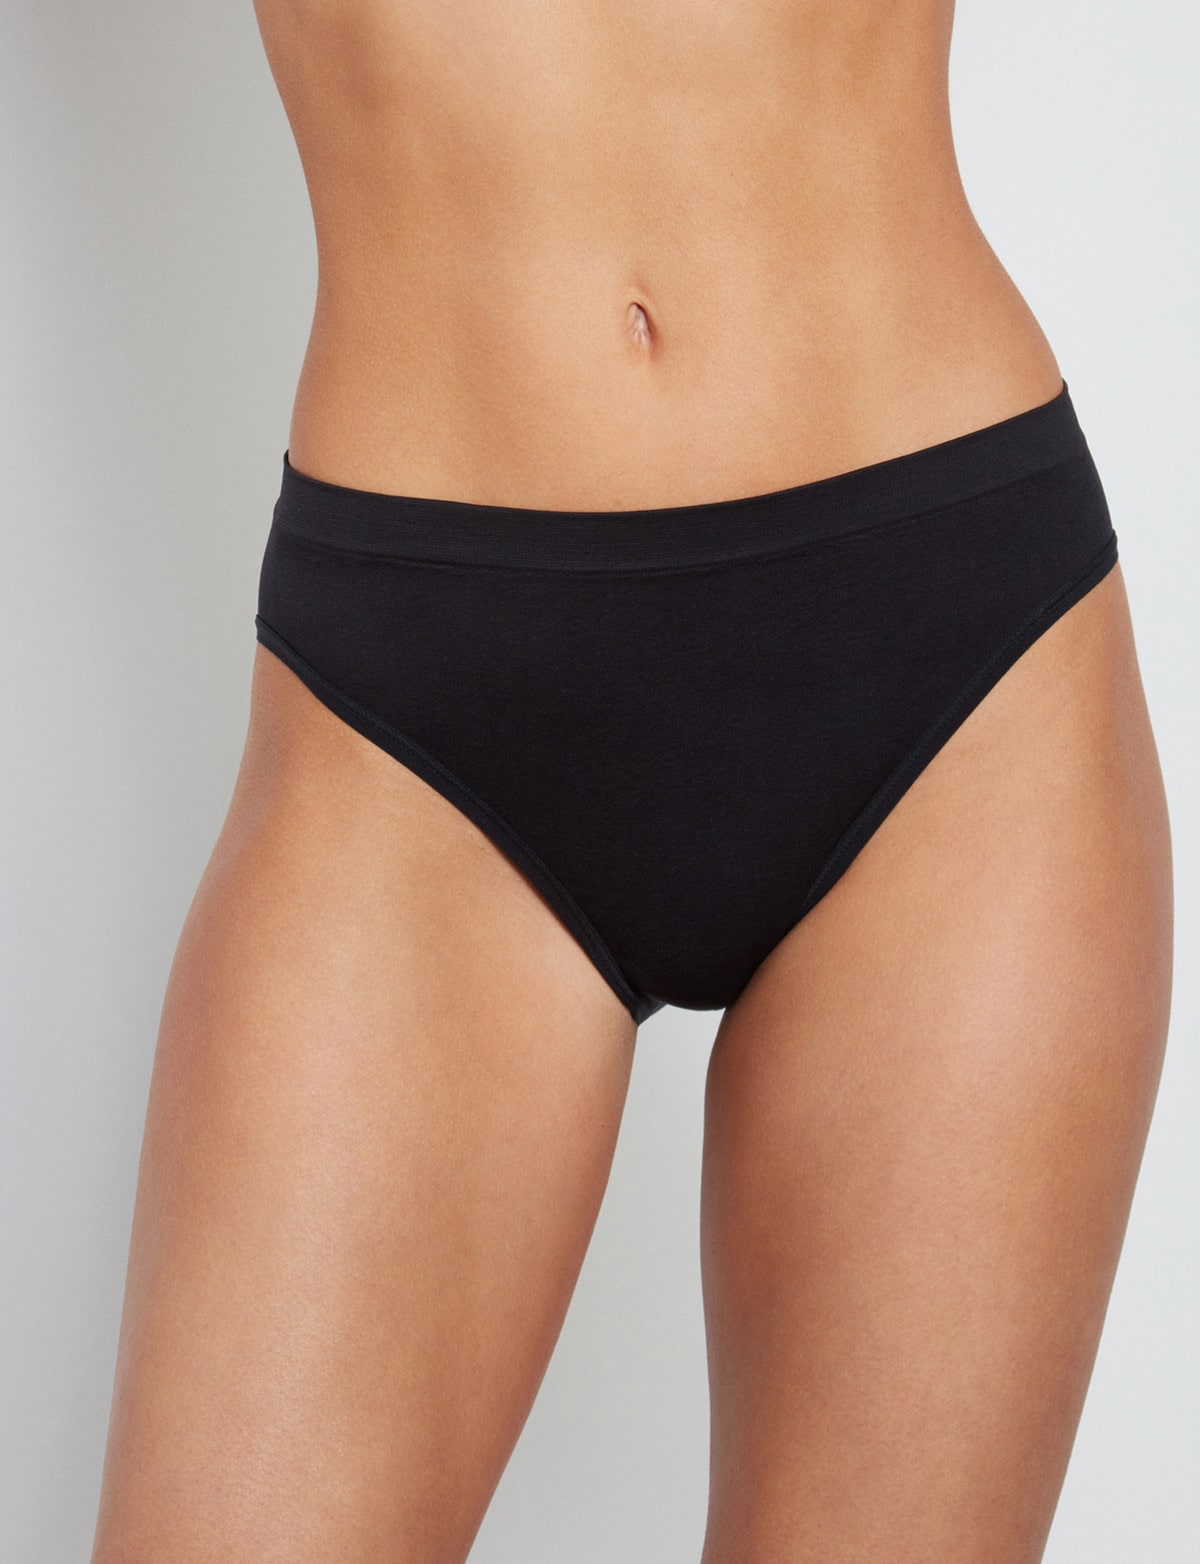 The High Leg Brief, Our Embrace